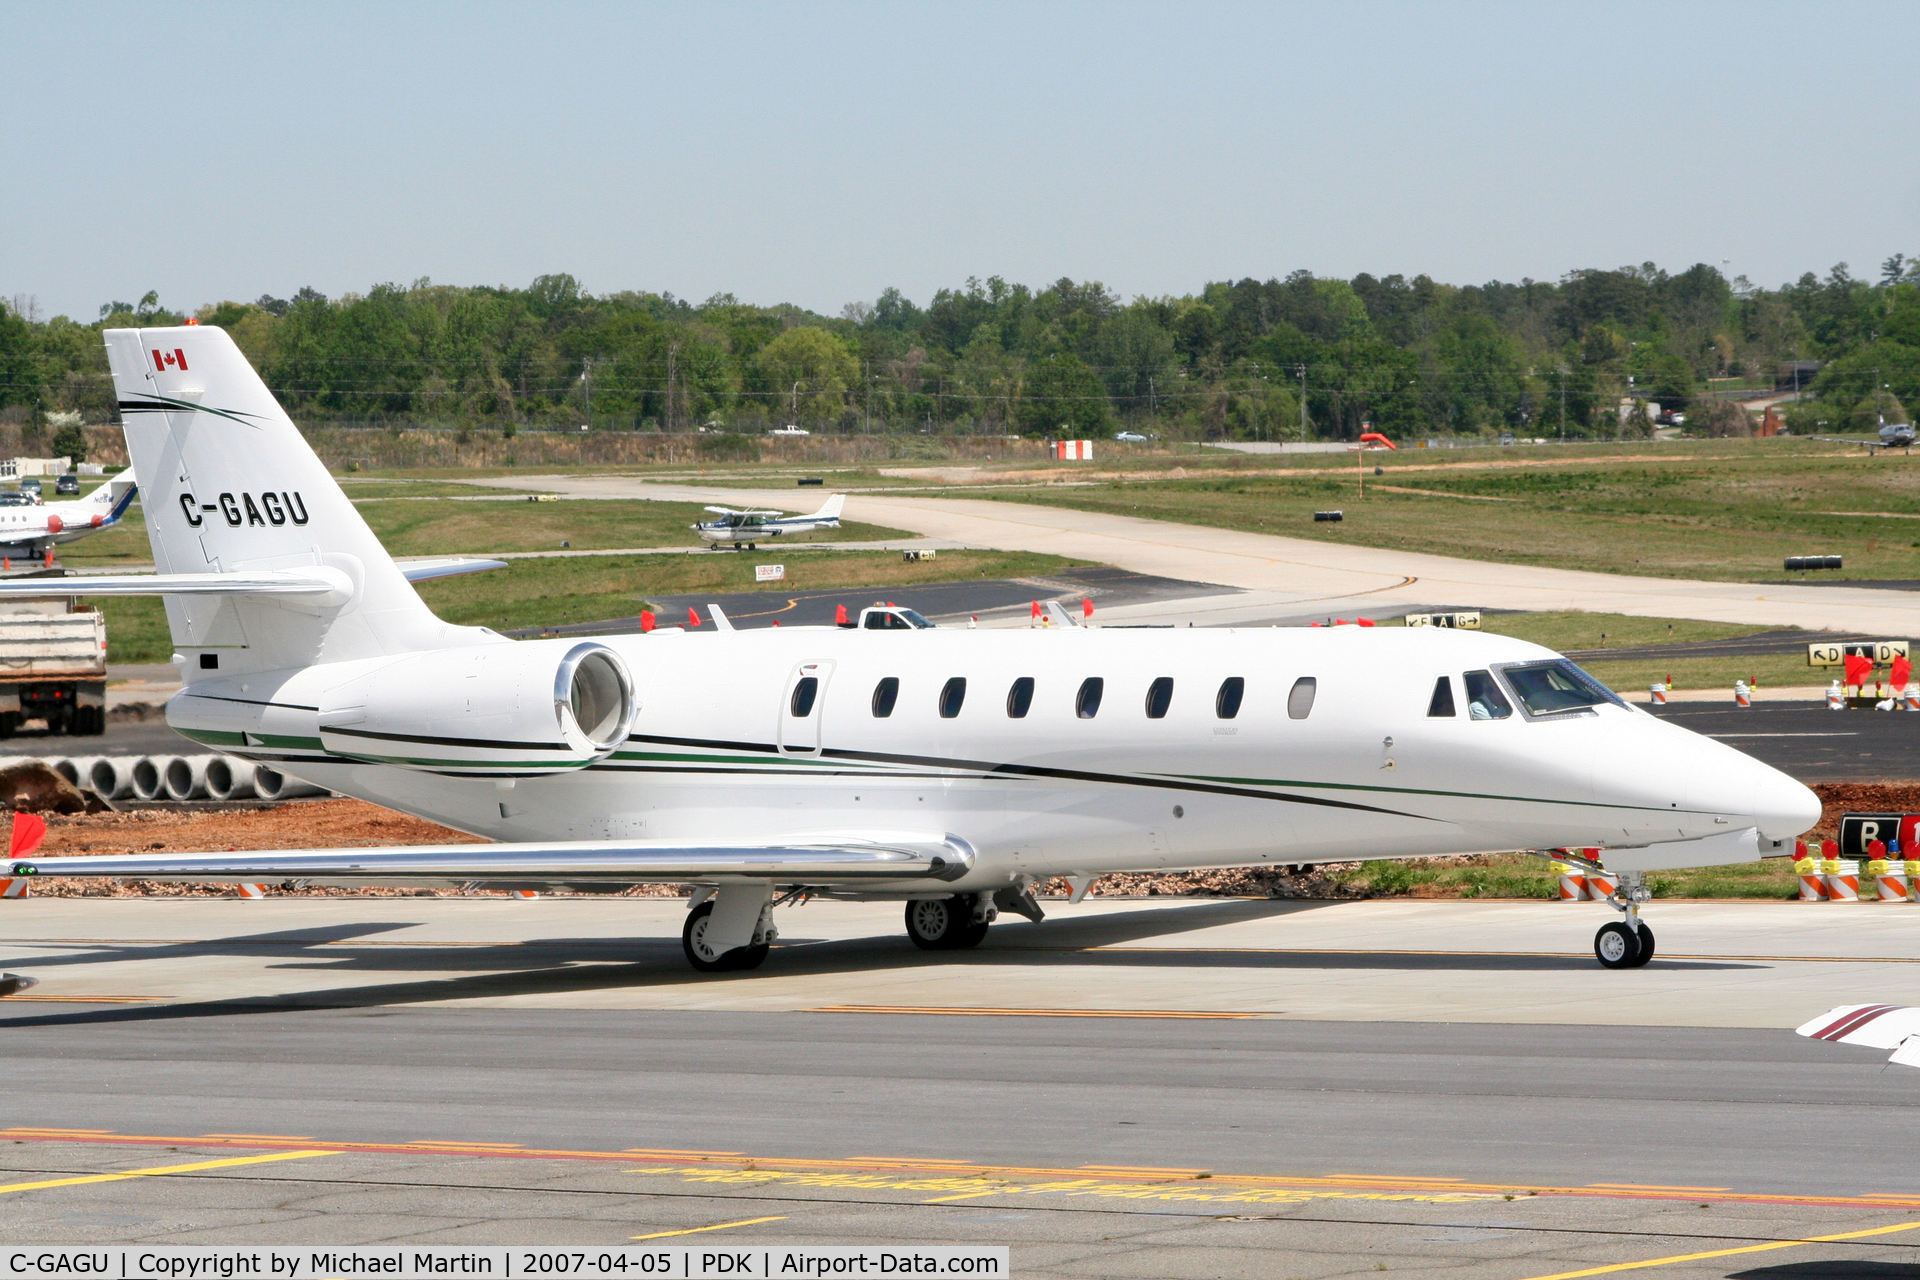 C-GAGU, 2006 Cessna 680 Citation Sovereign C/N 680-0100, Taxing past on going construction